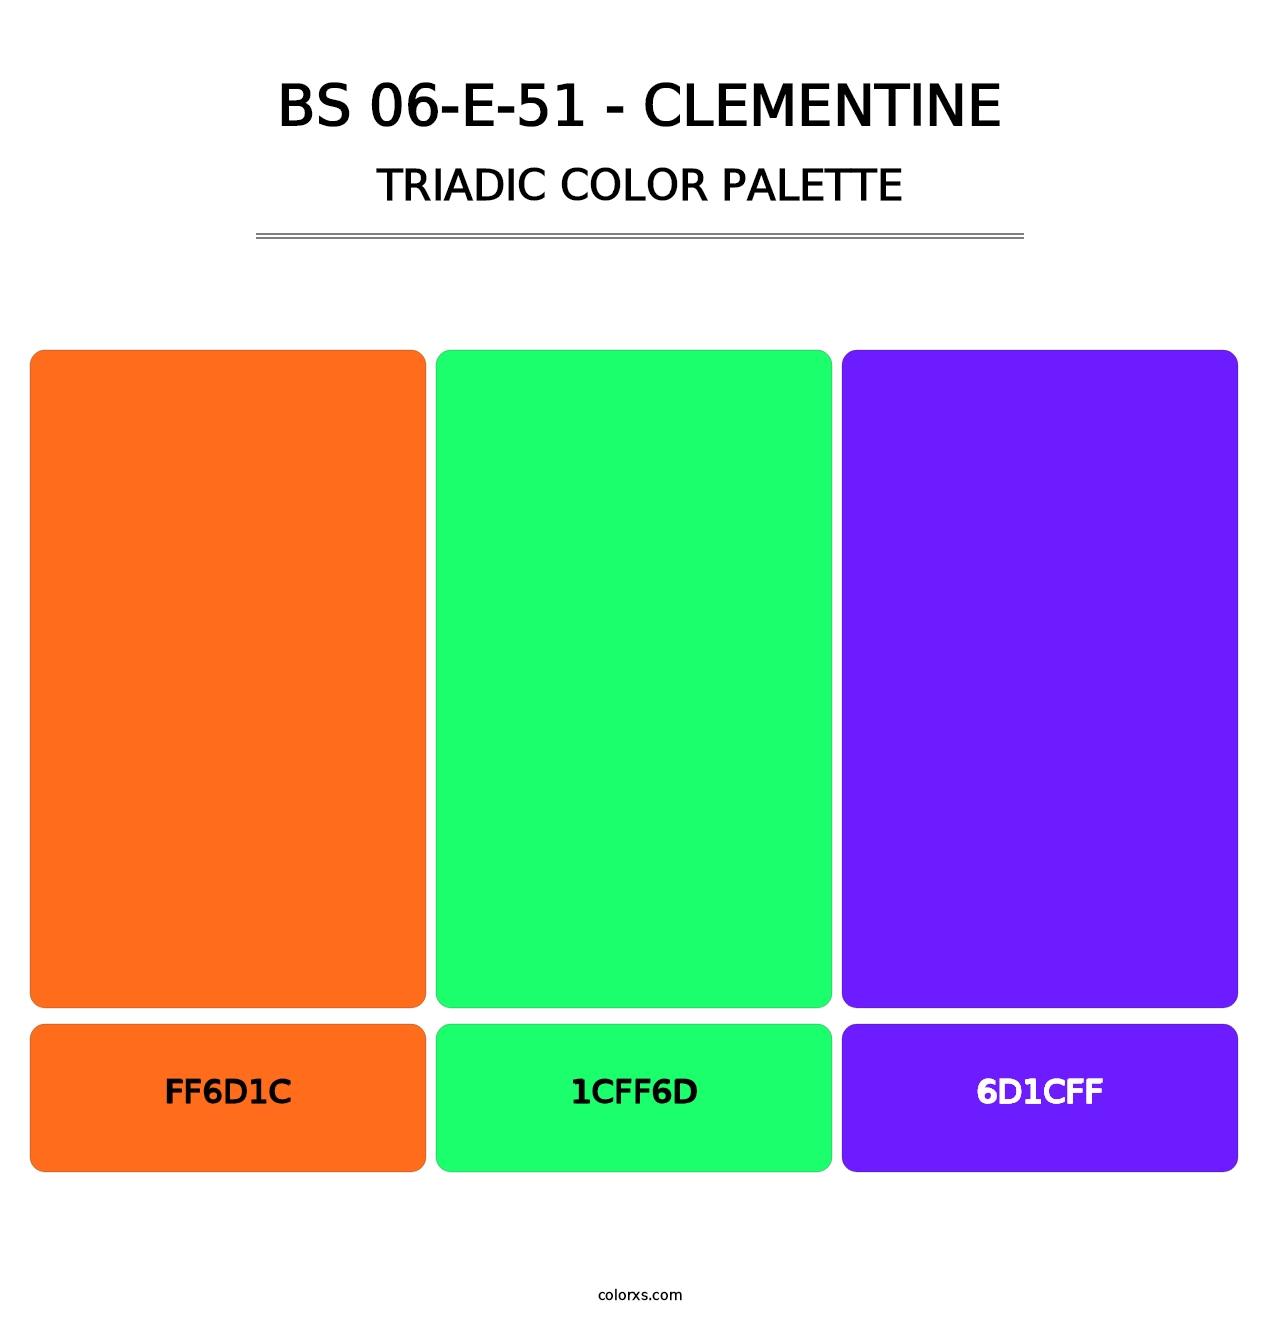 BS 06-E-51 - Clementine - Triadic Color Palette